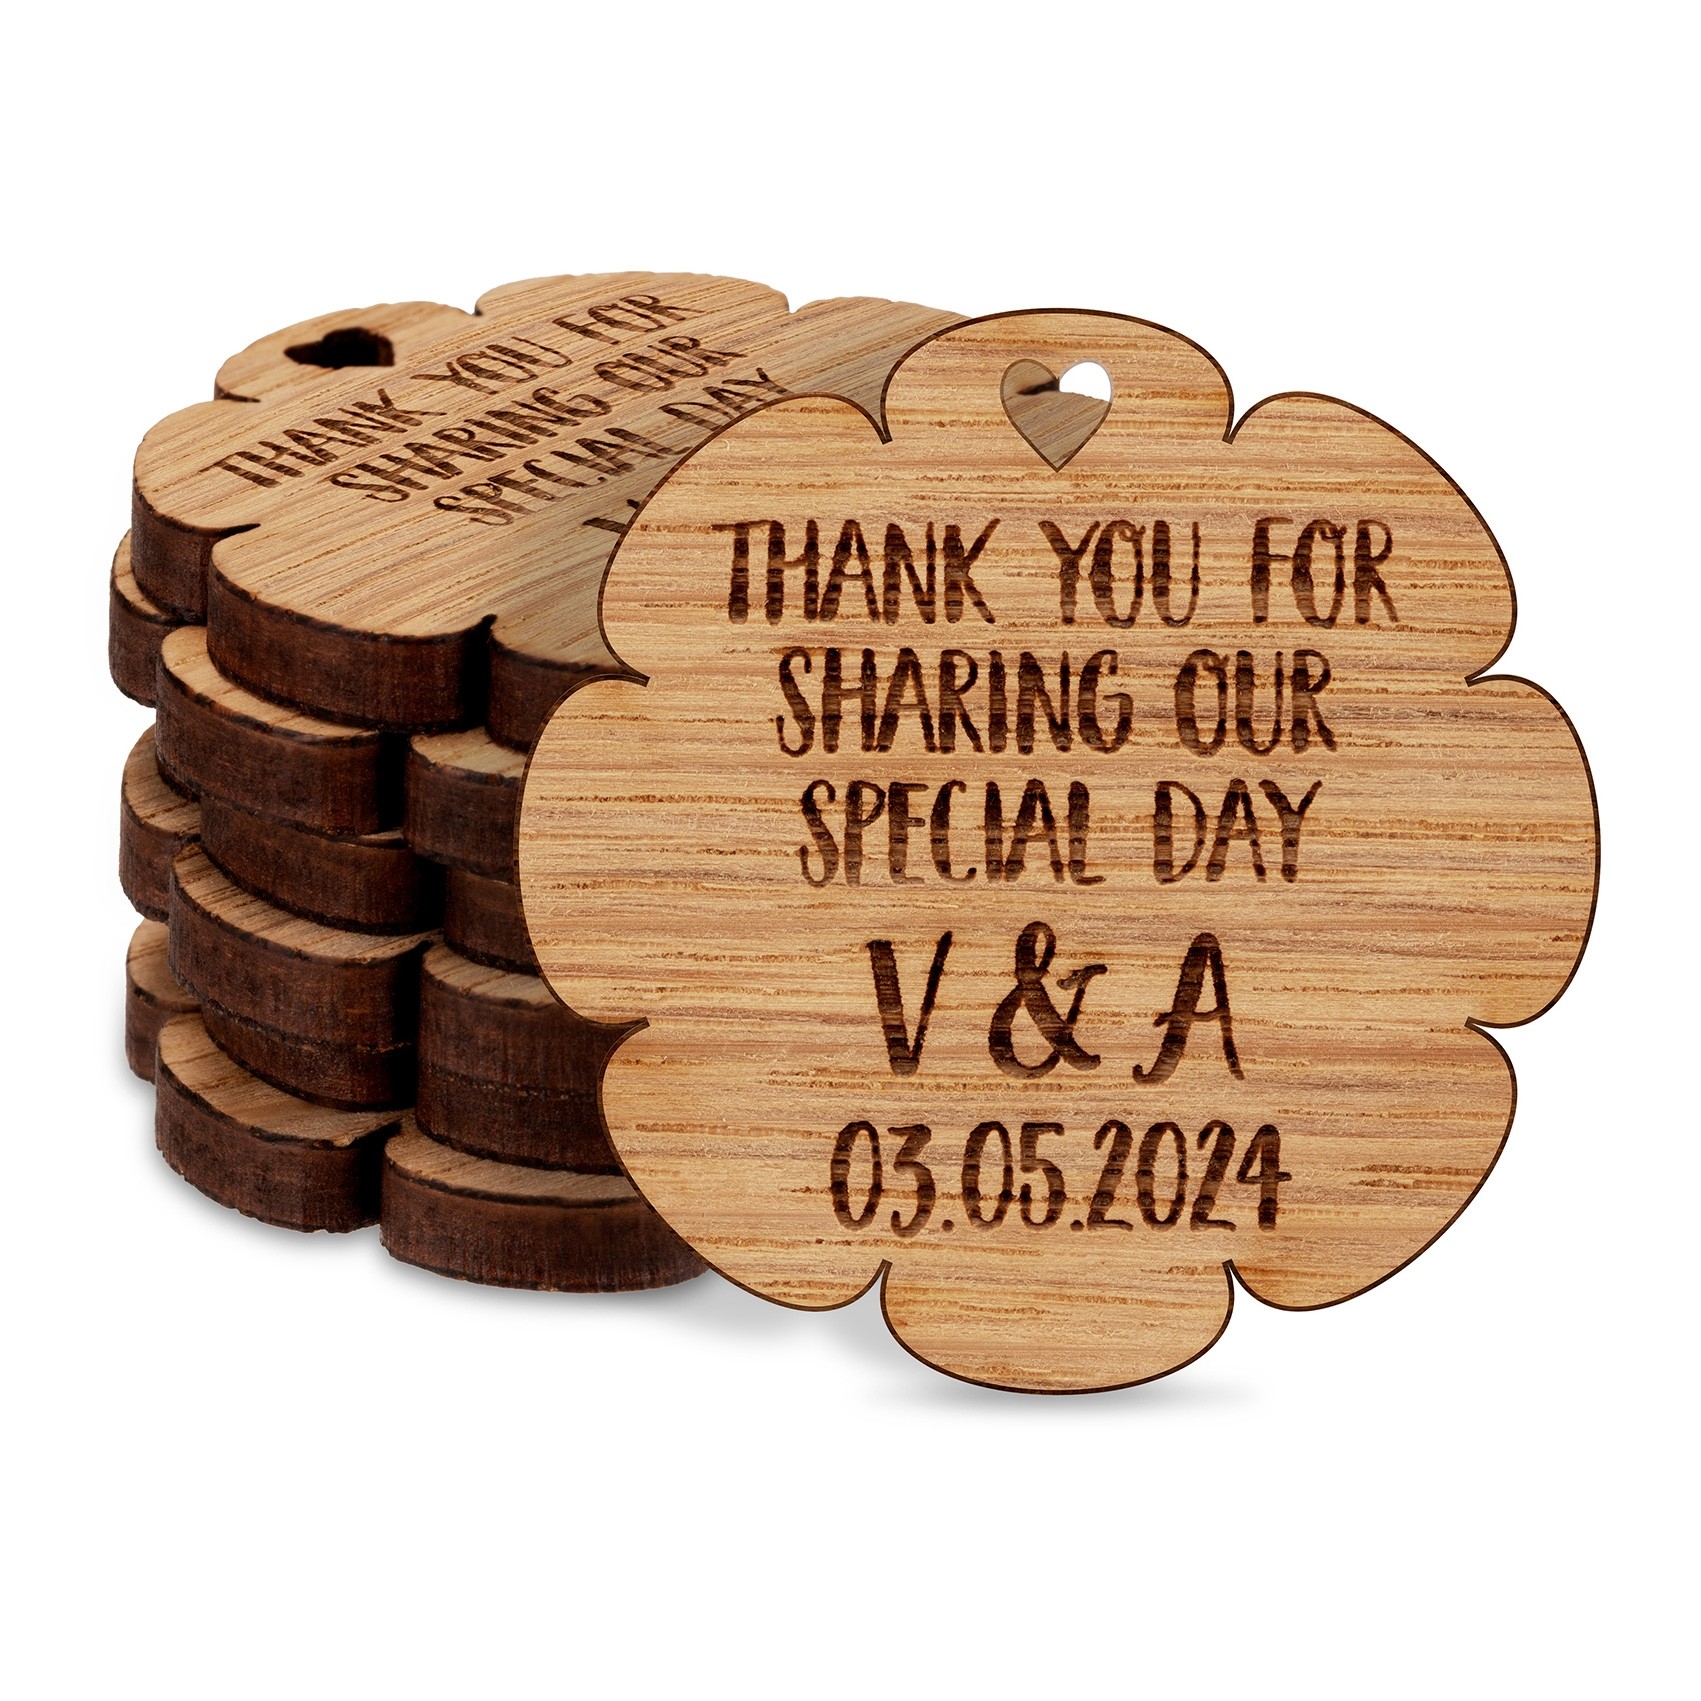 Personalised Thank You For Sharing Our Special Day Initials Wedding Favours Table Decorations Flower Floral Wooden Confetti Sprinkles Scatters Charms Custom Tags